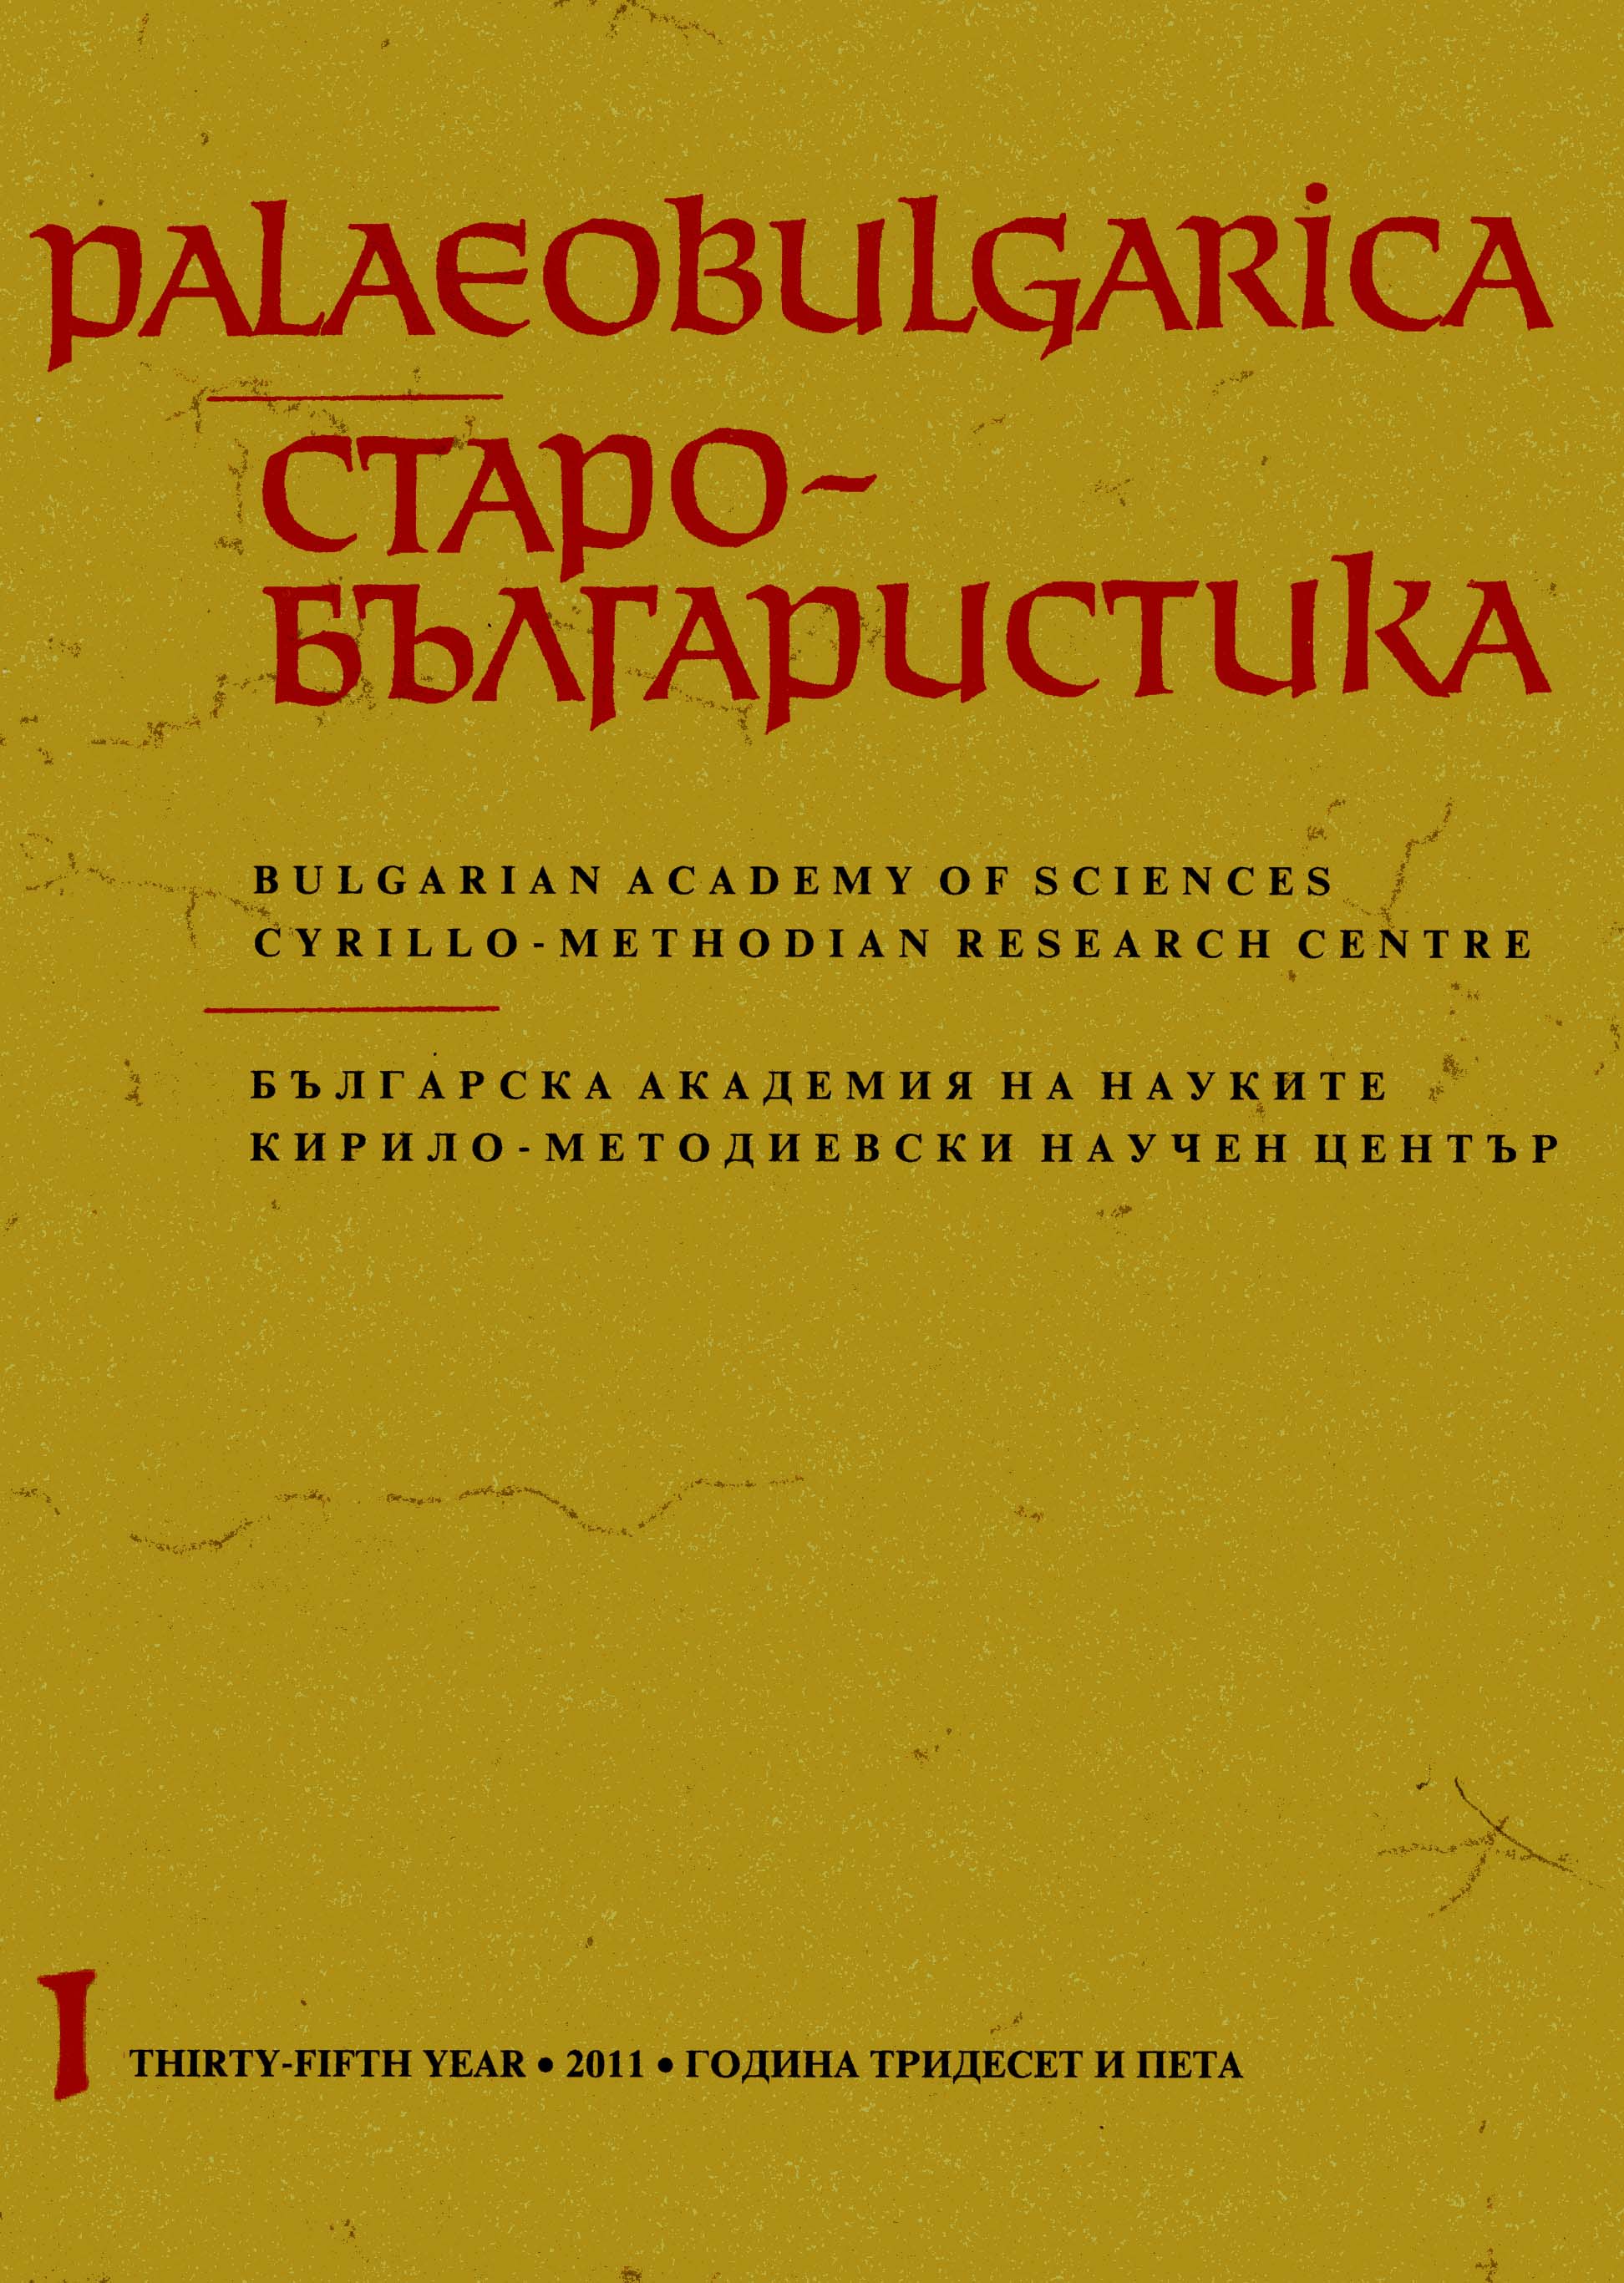 A New Contribution in the Field of Cyrillo-Methodian Retrospective Bibliography Cover Image